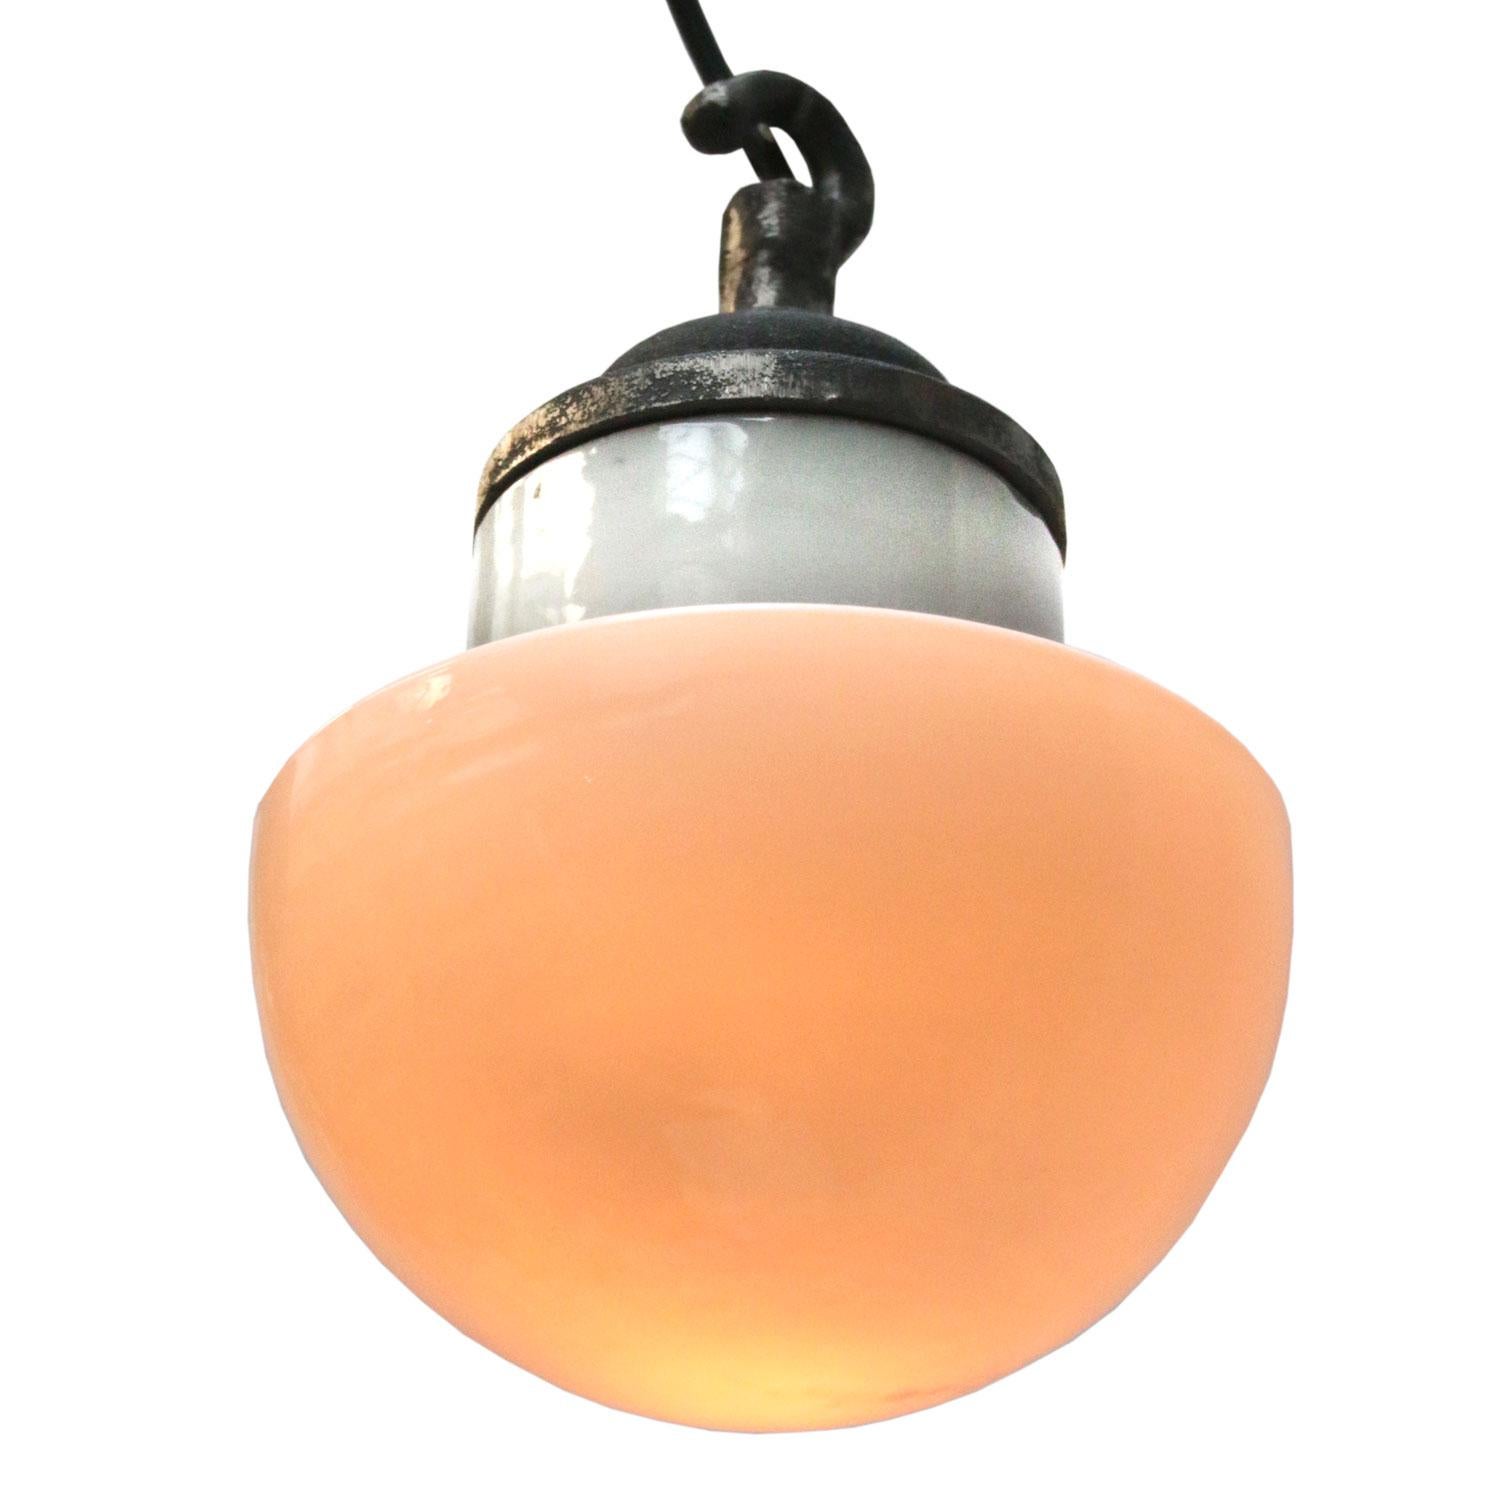 Porcelain industrial hanging lamp. White porcelain. Cast iron and Opaline glass.
Two conductors. No ground.

Weight: 1.5 kg / 3.3 lb

All lamps have been made suitable by international standards for incandescent light bulbs, energy-efficient and LED